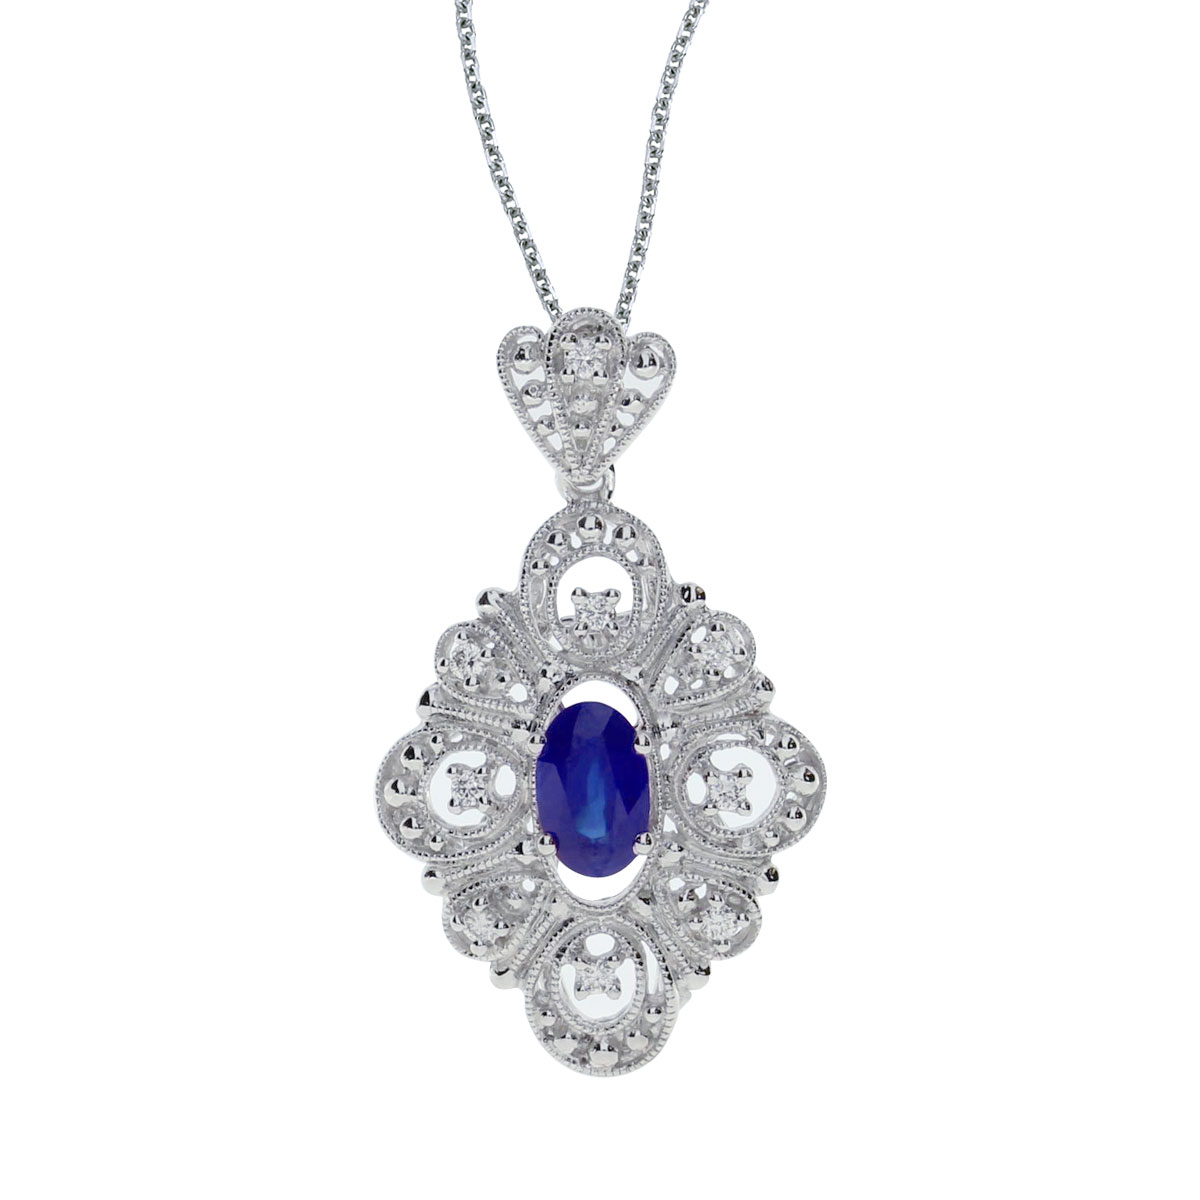 JCX2597: This beautiful 14k white gold pendant features a bright 6x4 mm oval sapphire and .08 carats of shimmering diamonds.